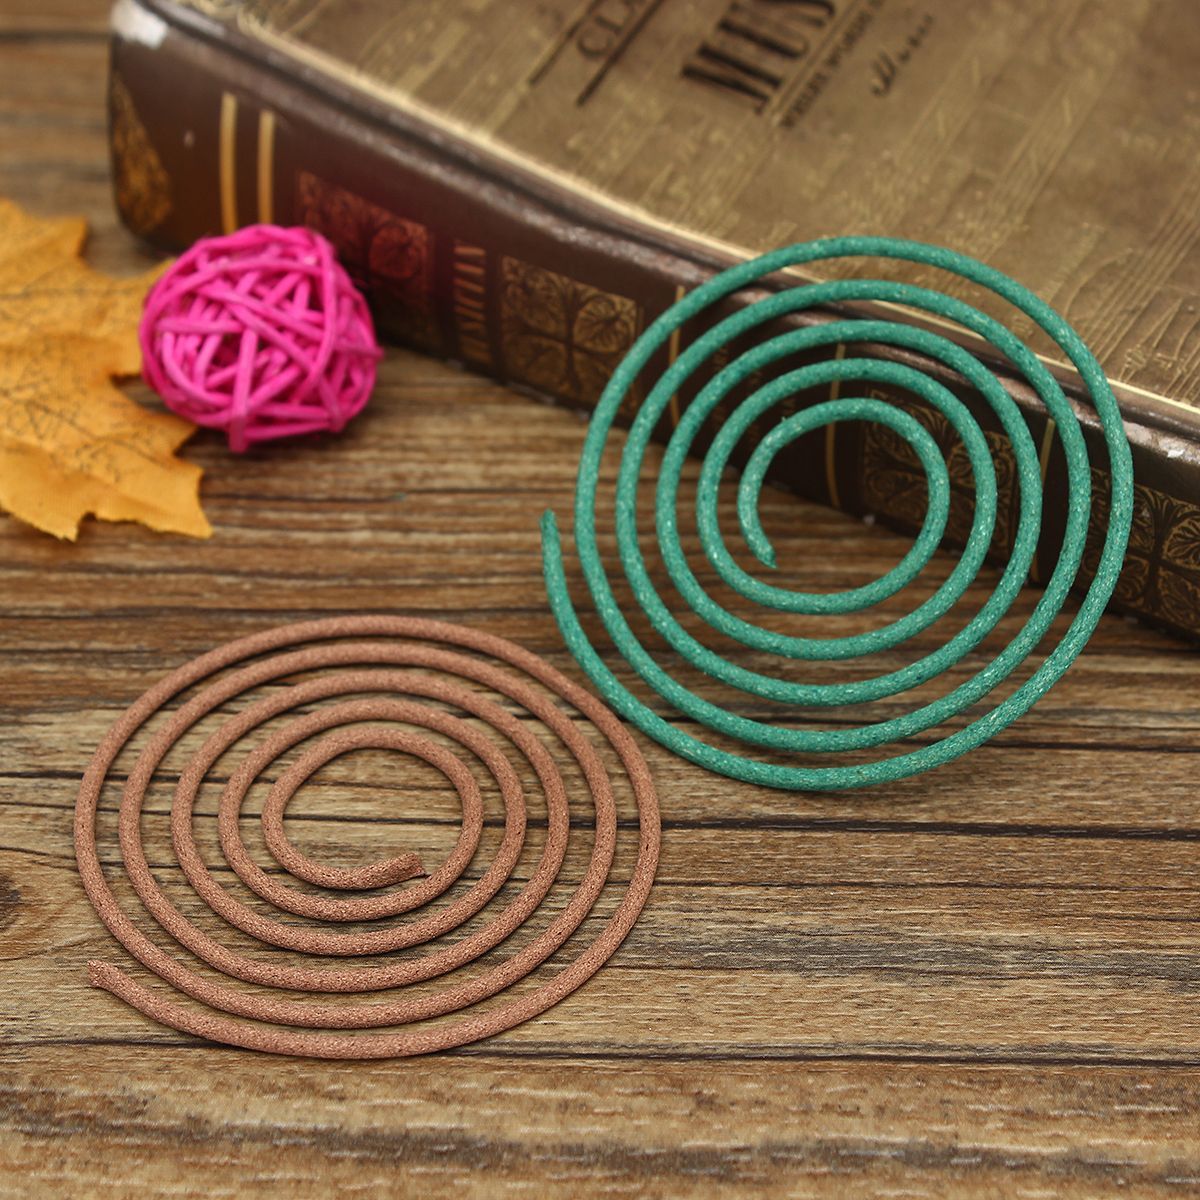 48pcs-Natural-Coil-Incense-Fragrance-Indoor-Aromatherapy-Buddhist-Holder-1719573